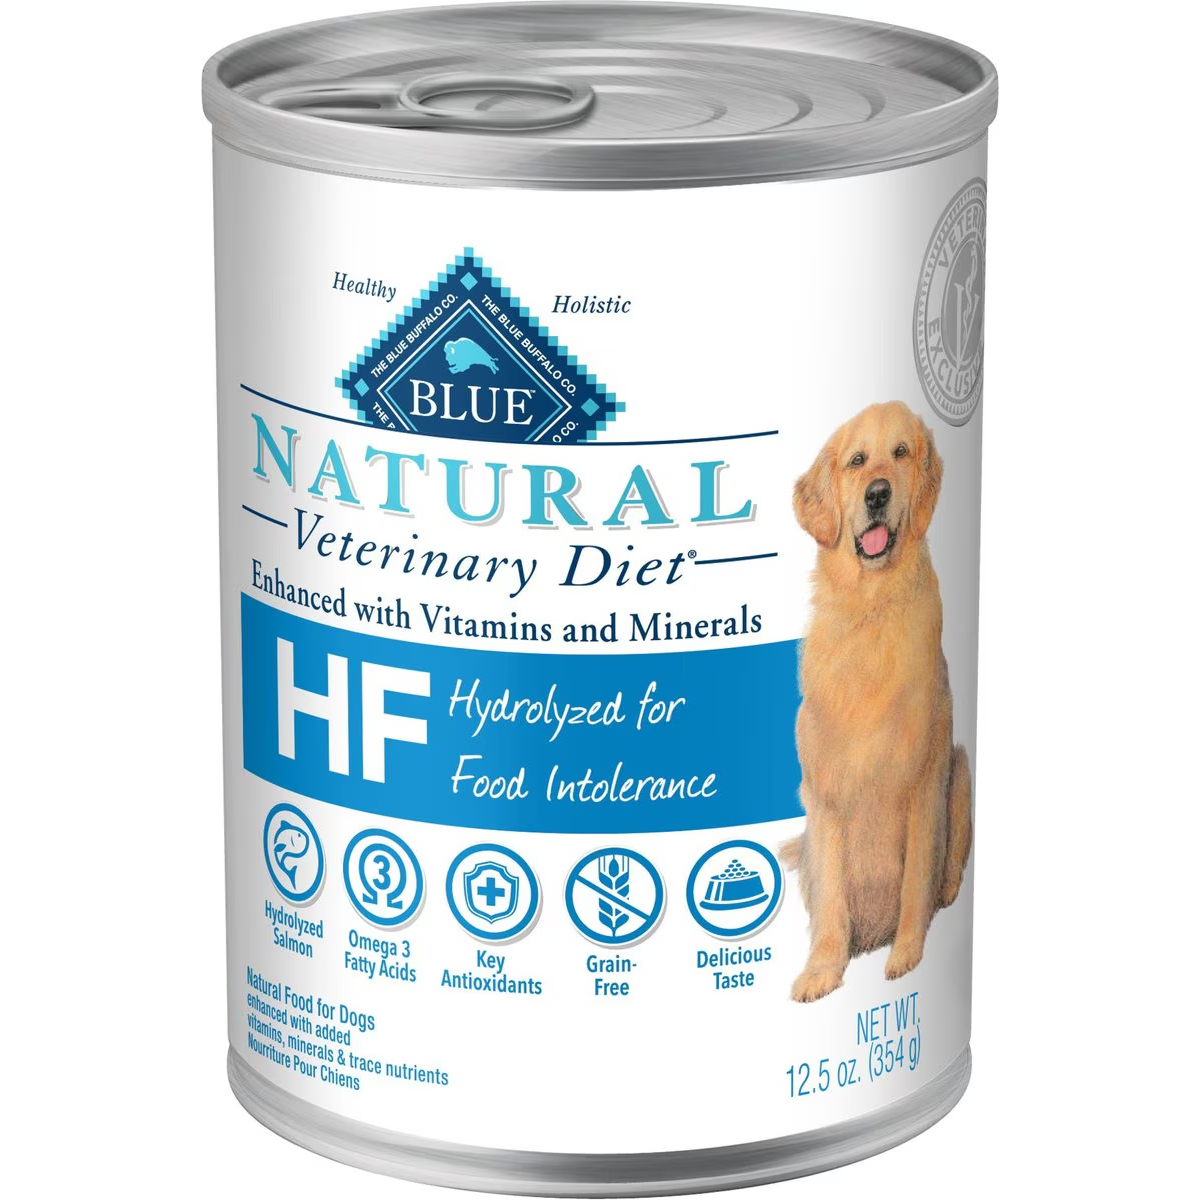 Blue Buffalo Natural Veterinary Diet HF Hydrolyzed for Food Intolerance Grain